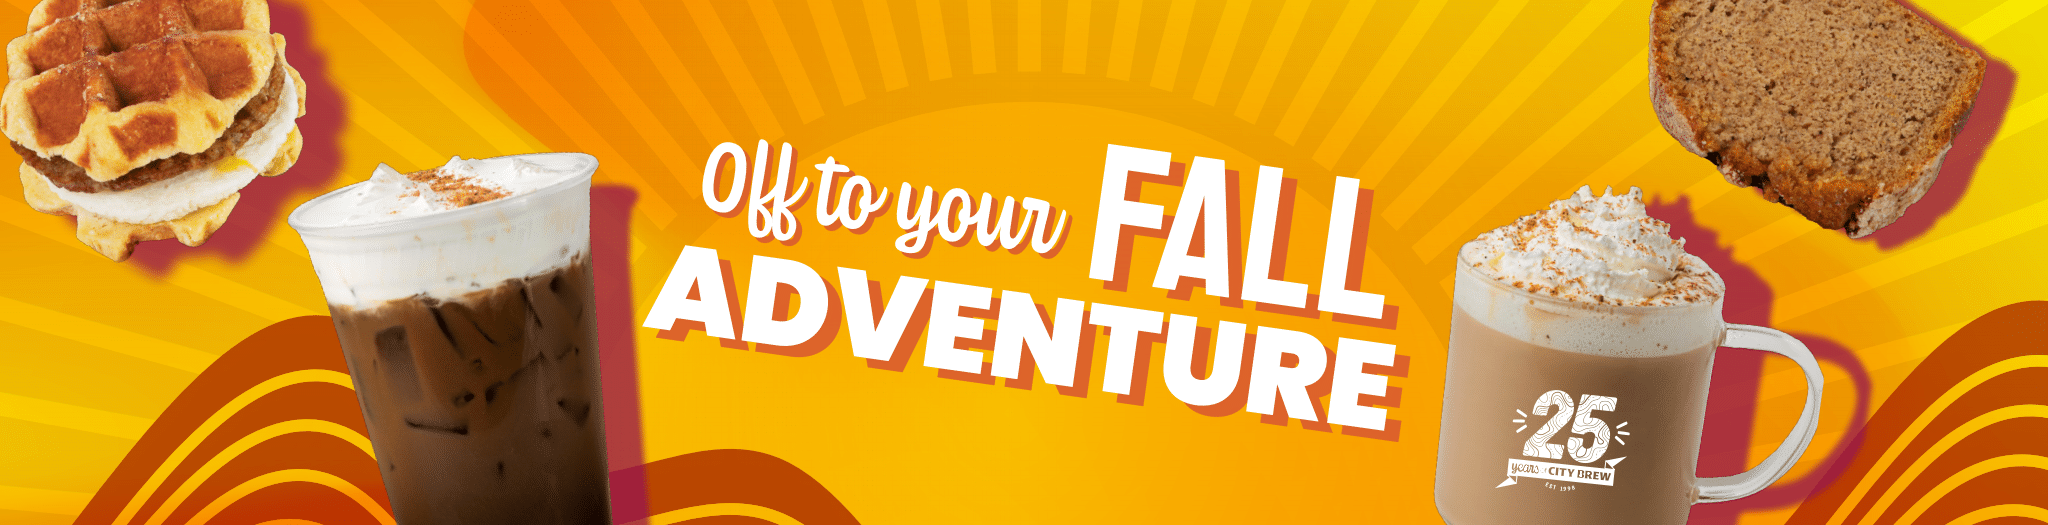 Off to your Fall adventure.